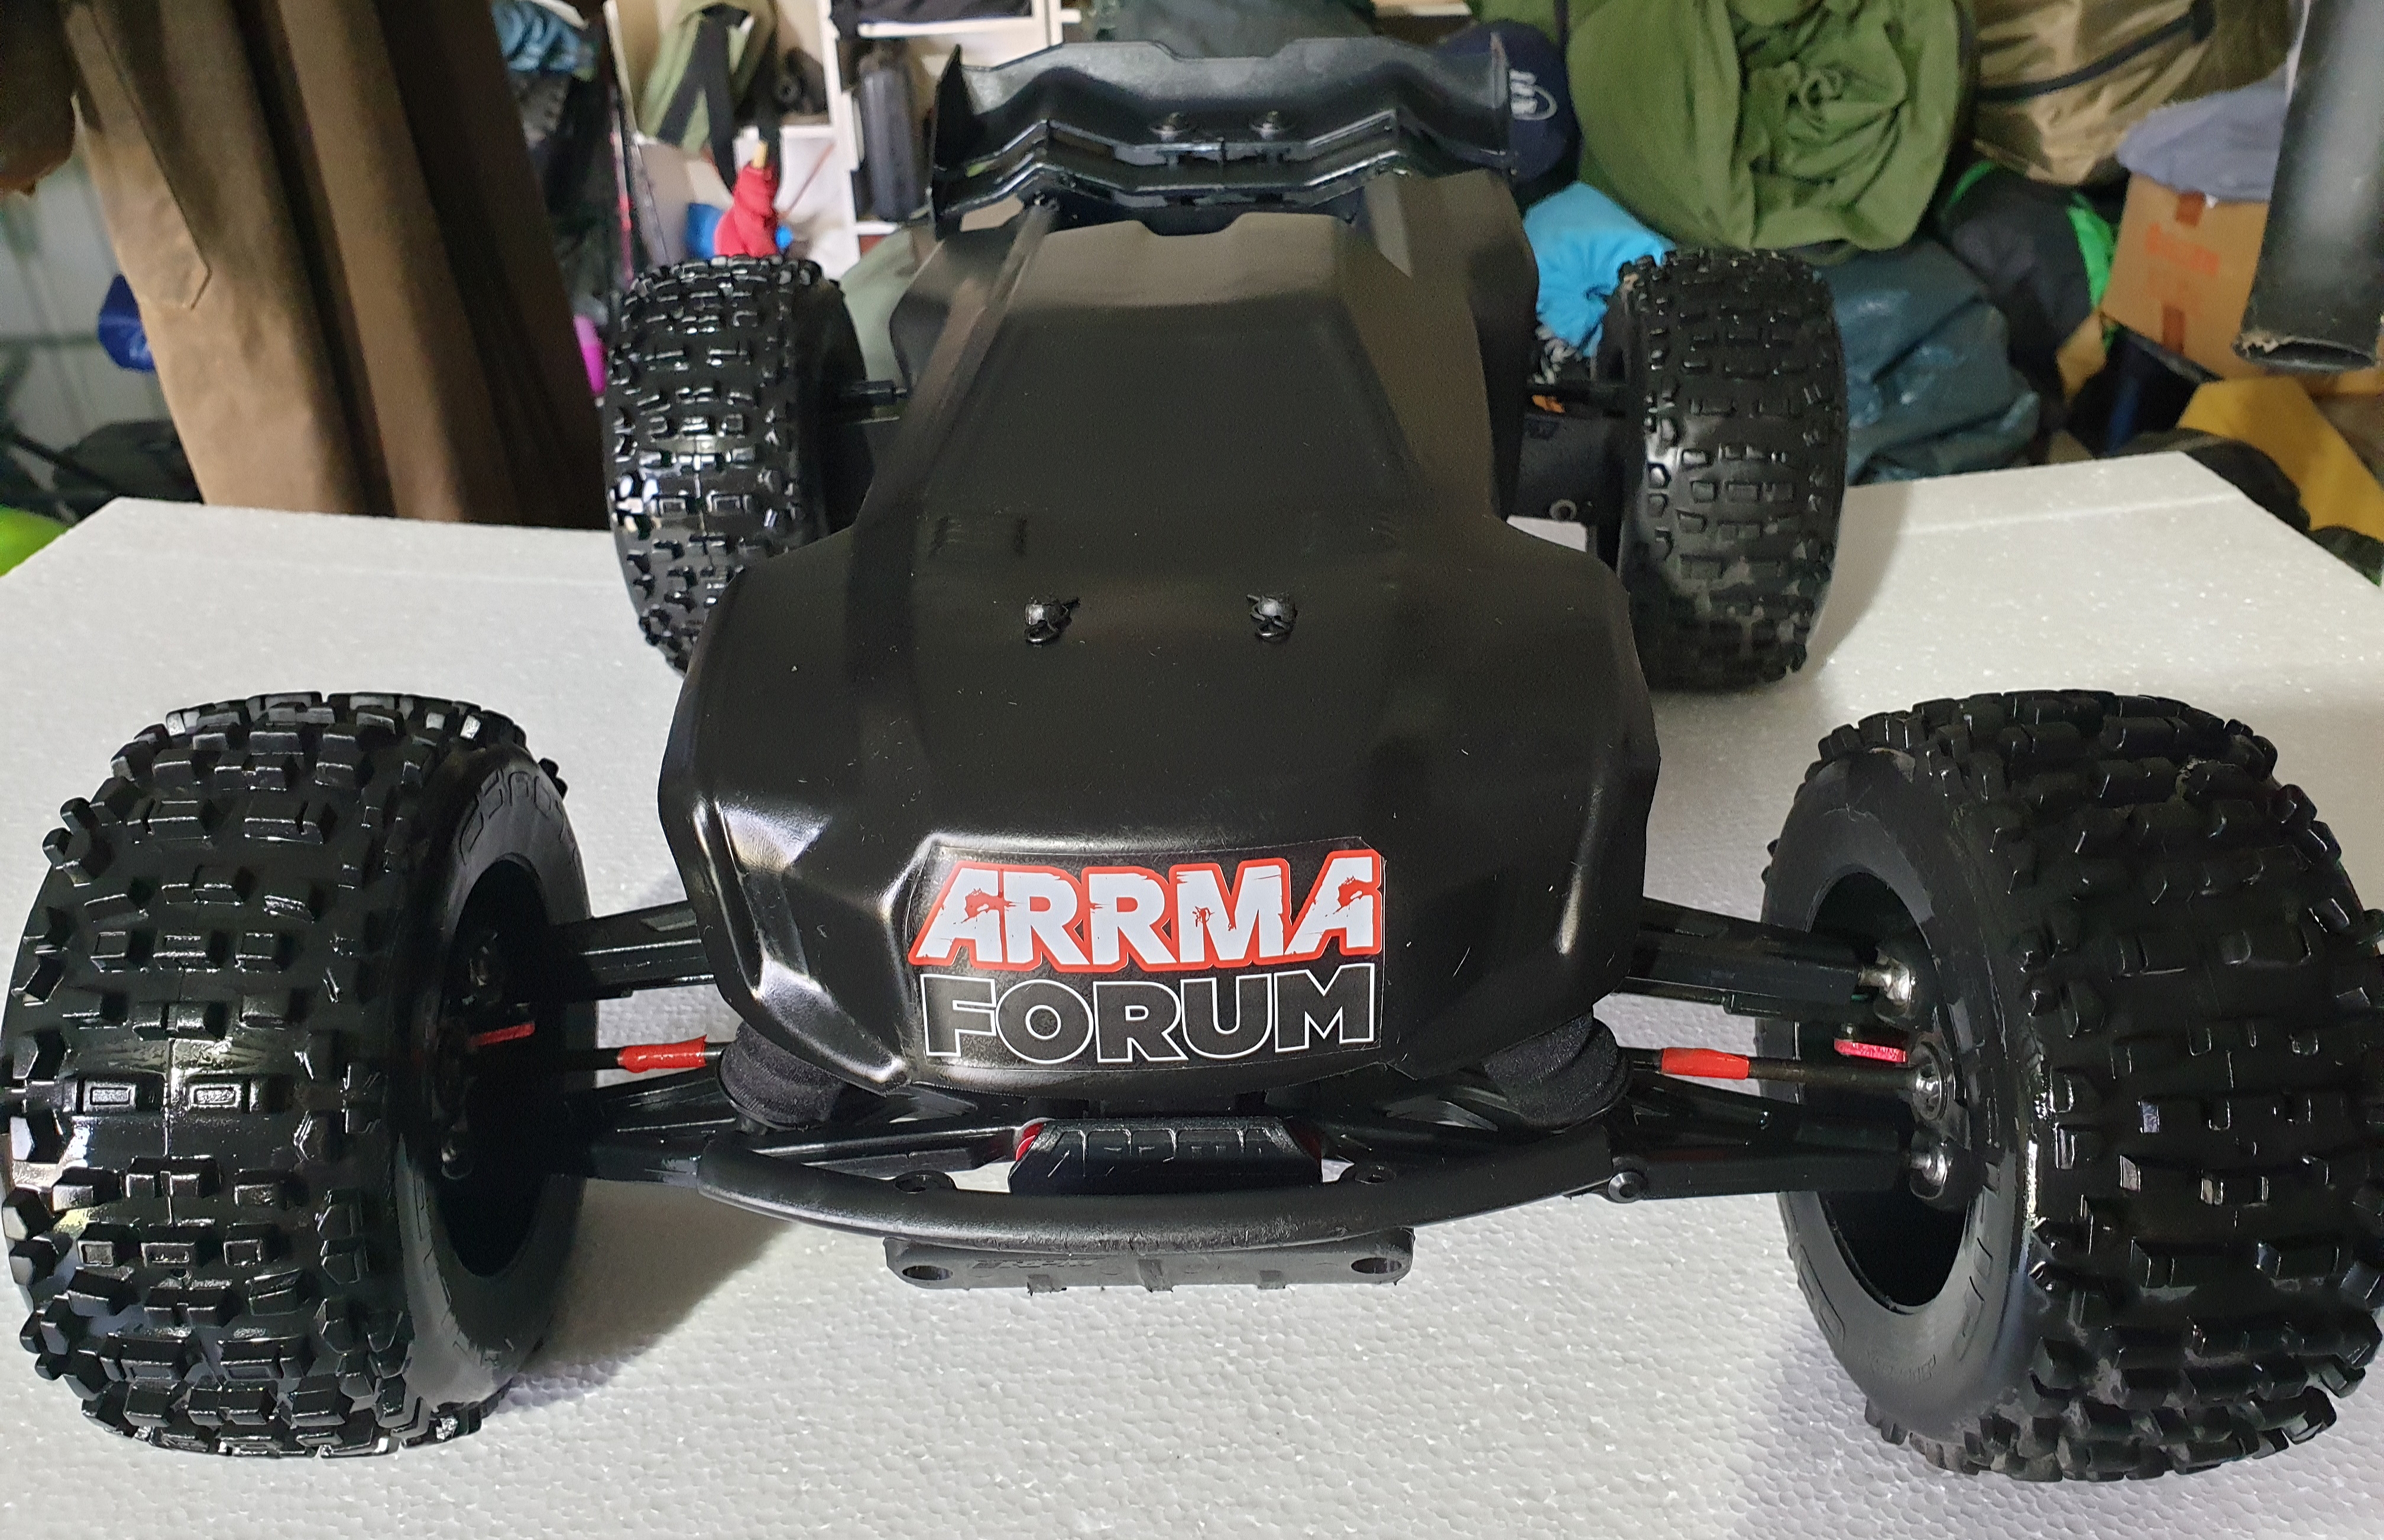 Arrma Forum all up in your grill